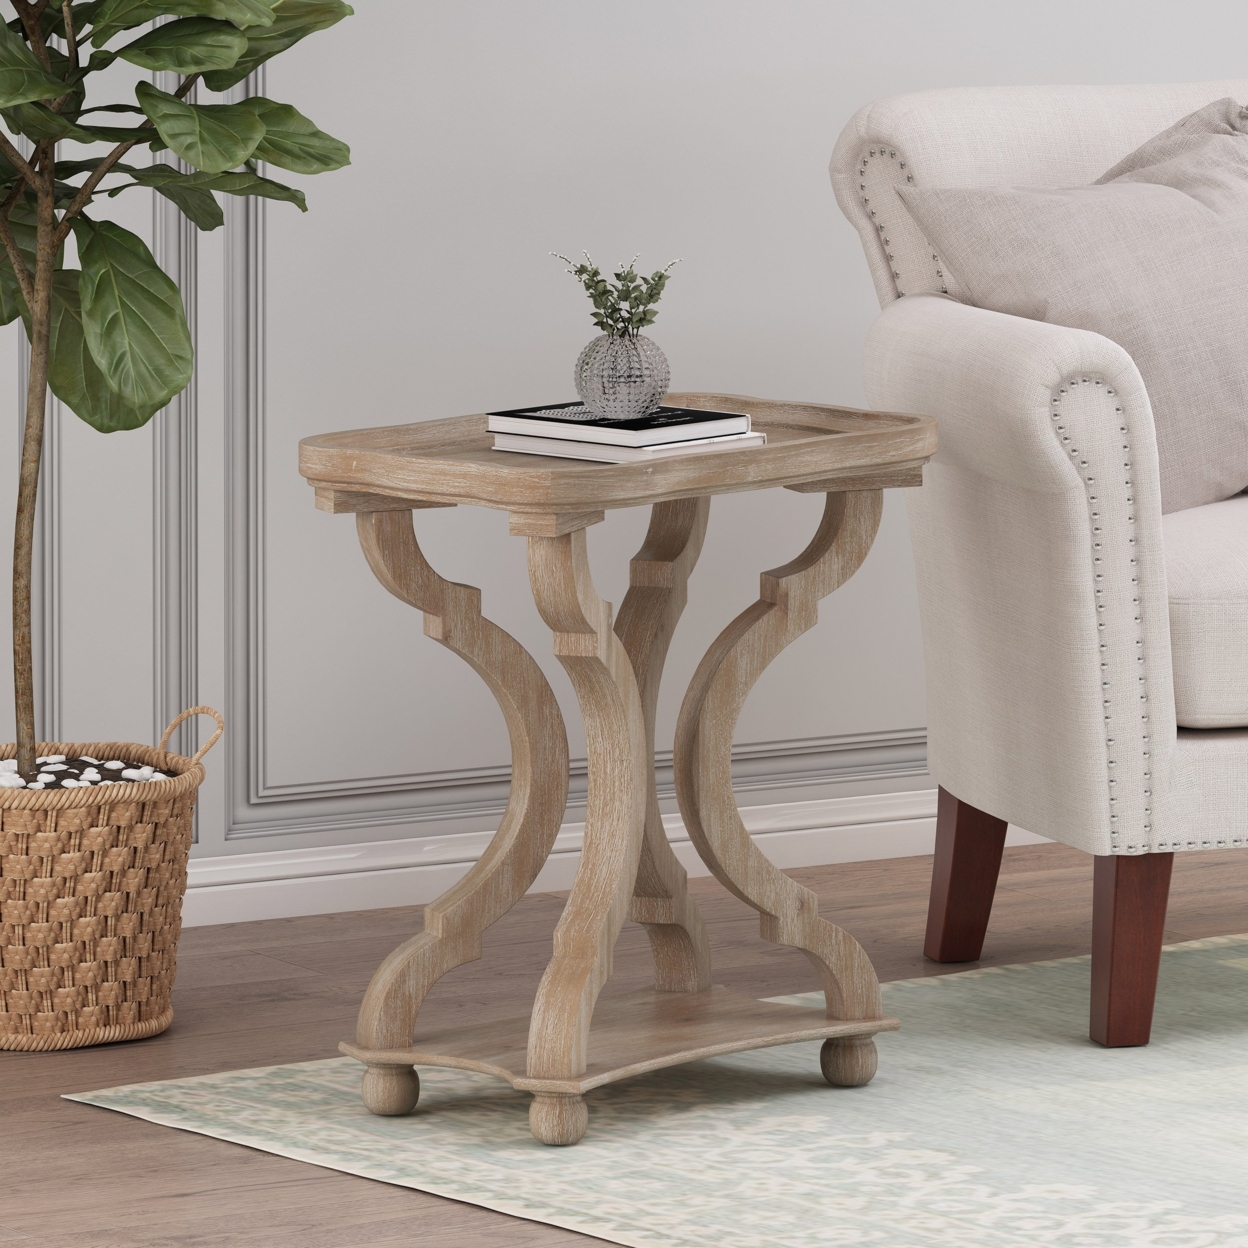 Disney French Country Accent Table With Rectangular Top - Natural